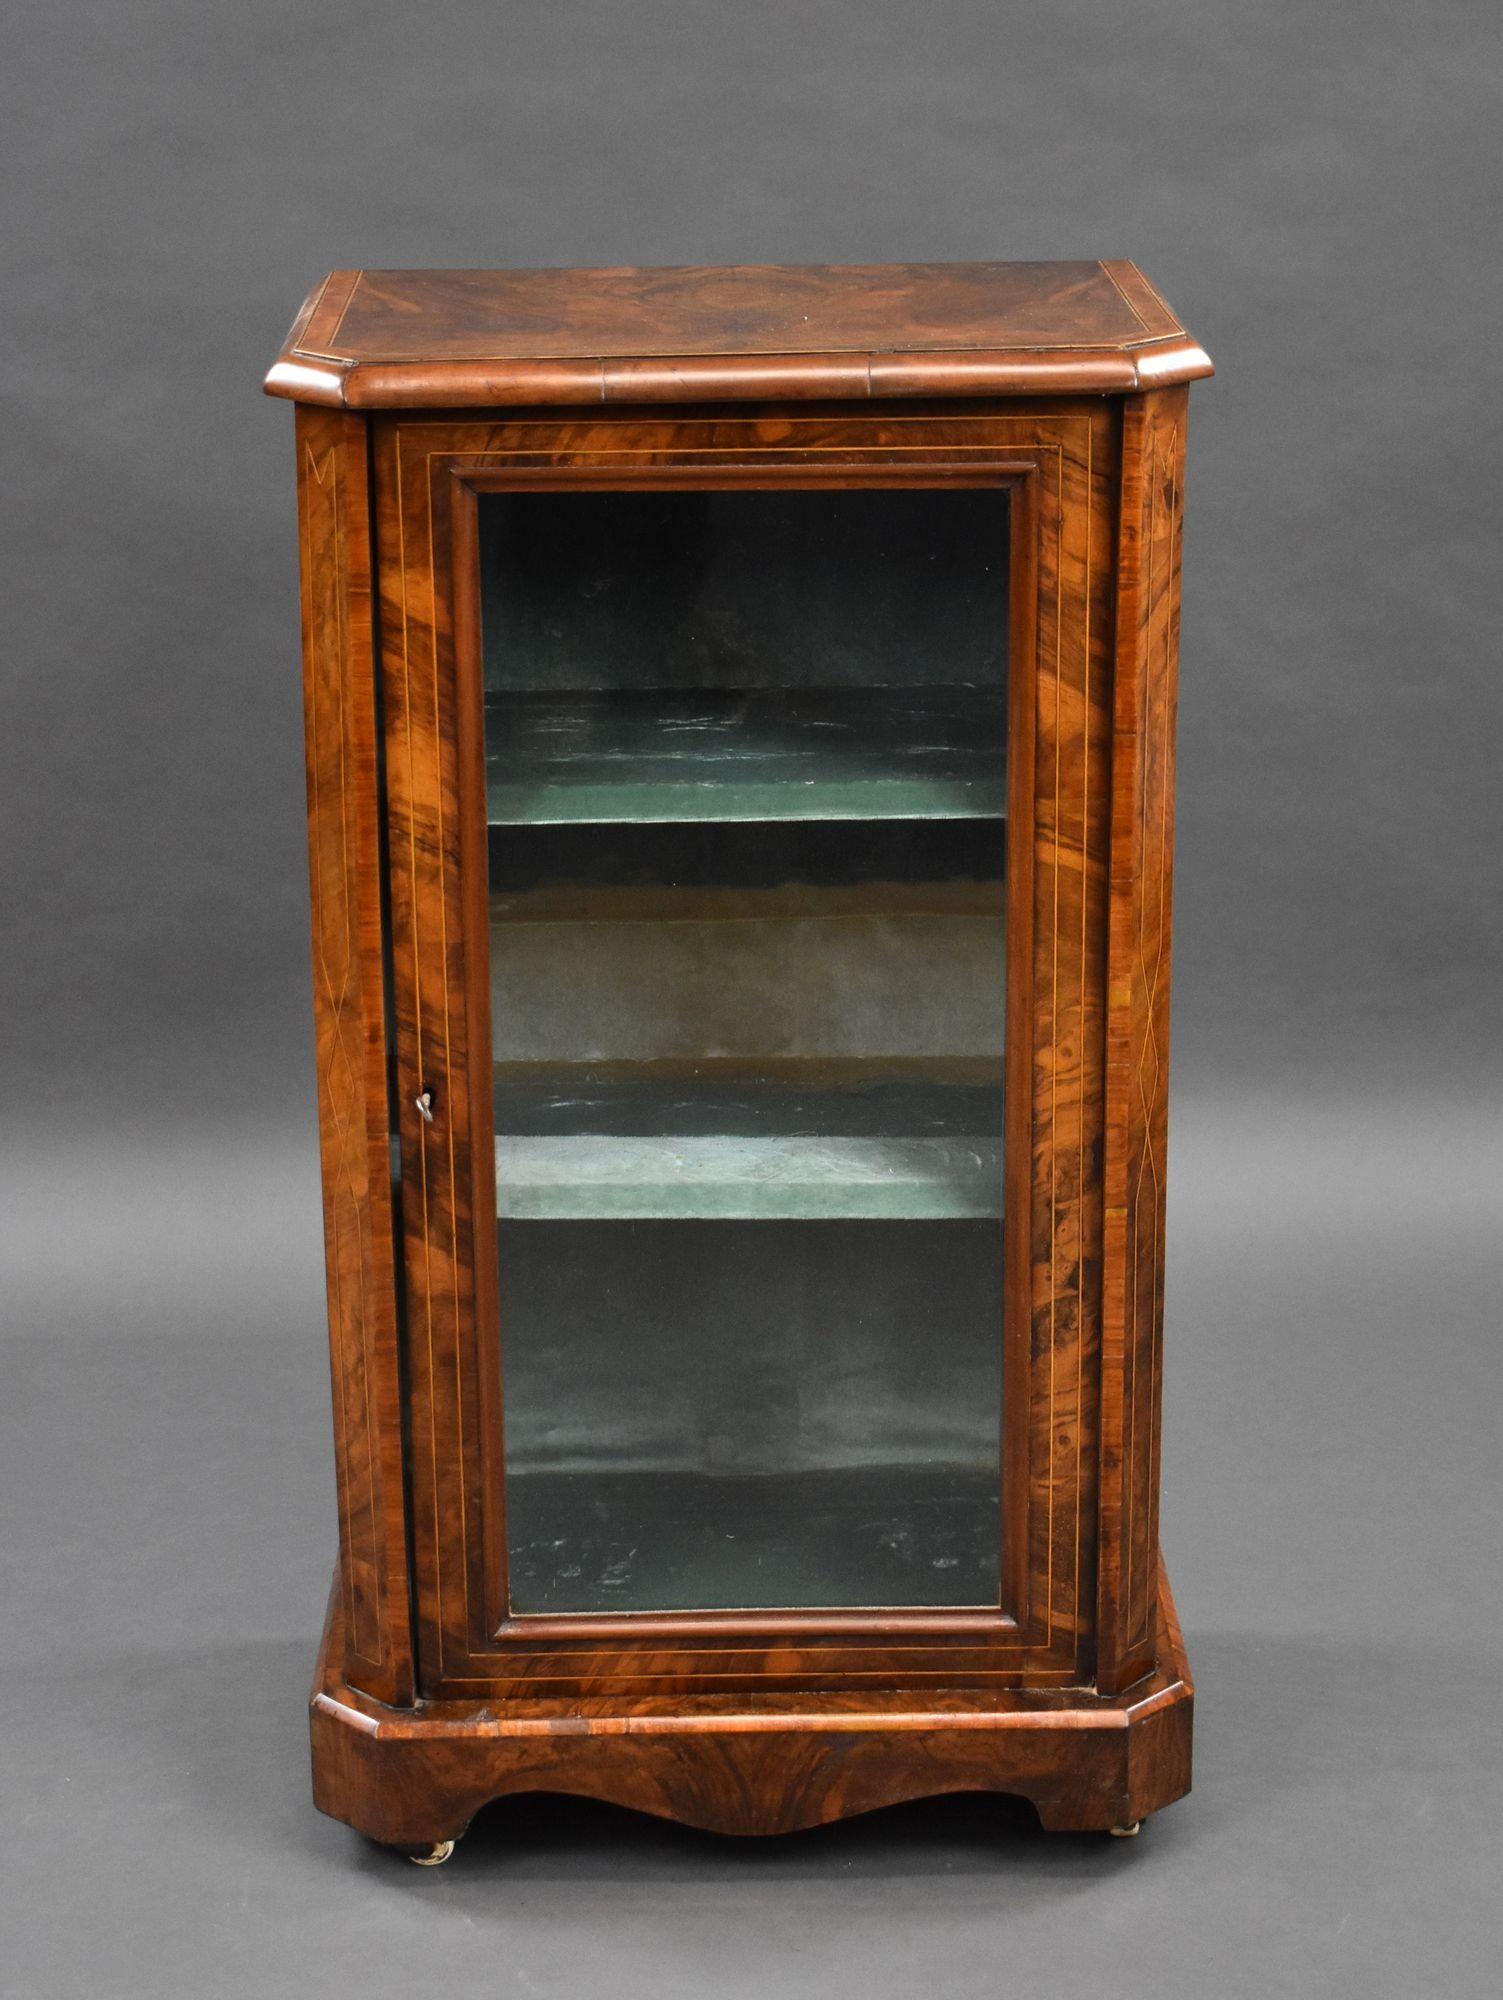 For sale is a good quality Victorian burr walnut music cabinet, remaining in very good condition.
Measures: width: 54cm, depth: 35cm, height: 95cm.